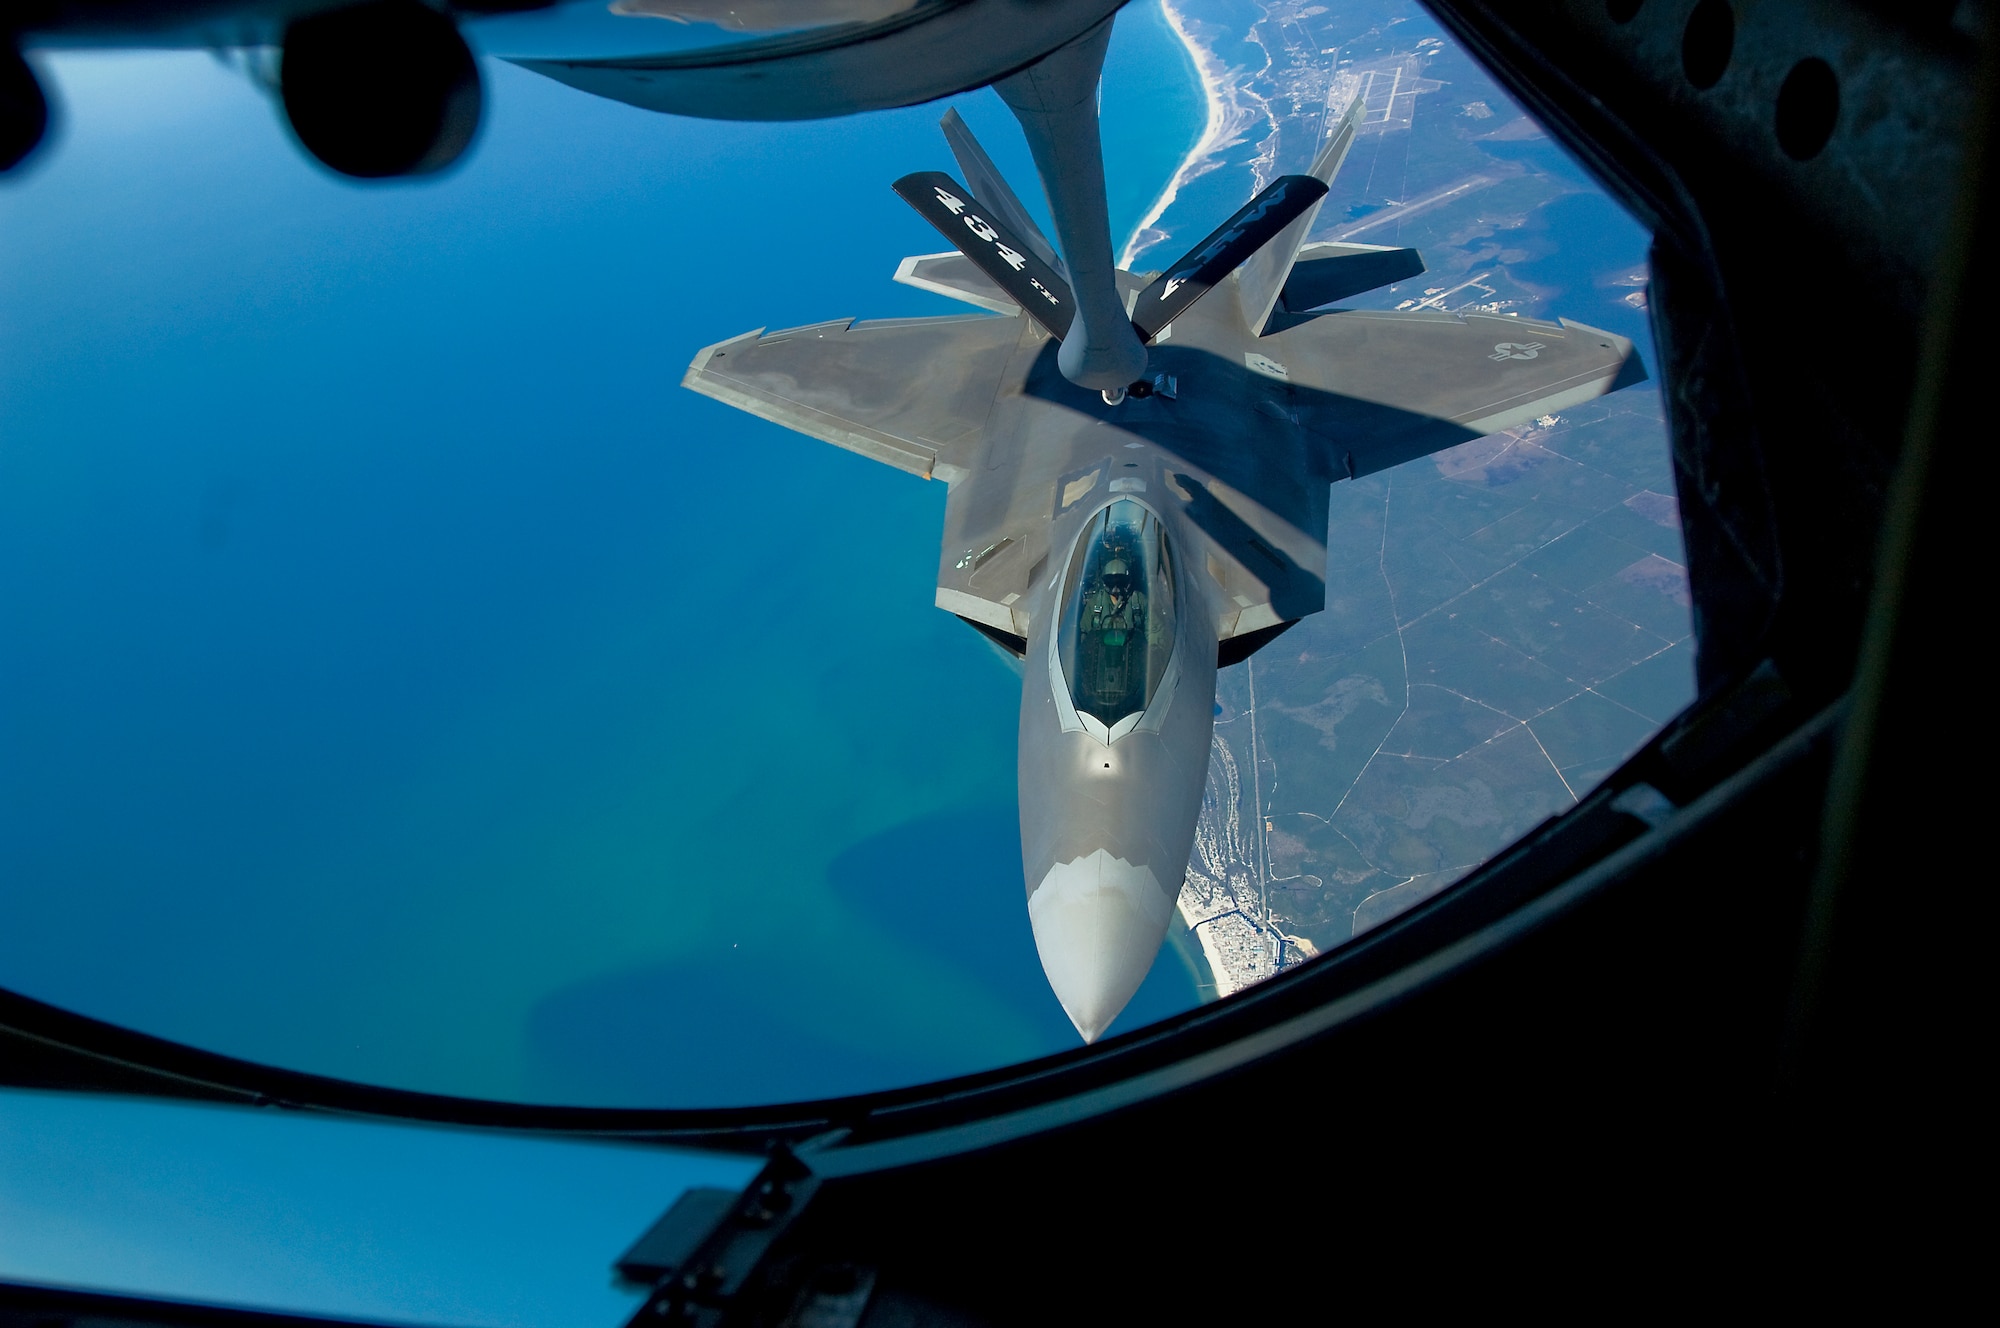 GRISSOM AIR RESERVE BASE, Ind. -- An F-22 Raptor from the 325th Fighter Wing prepares to connect to a KC-135 Stratotanker refueling boom over Florida March 18. Aerial refueling acts as a force multiplier for aircraft, allowing them to stay airborne longer and extending their reach. The KC-135 is from the 434th Air Refueling Wing at Grissom Air Reserve Base, Ind., which is the largest KC-135 unit in the Air Force Reserve Command. (U.S. Air Forcephoto/Senior Airman Damon Kasberg)